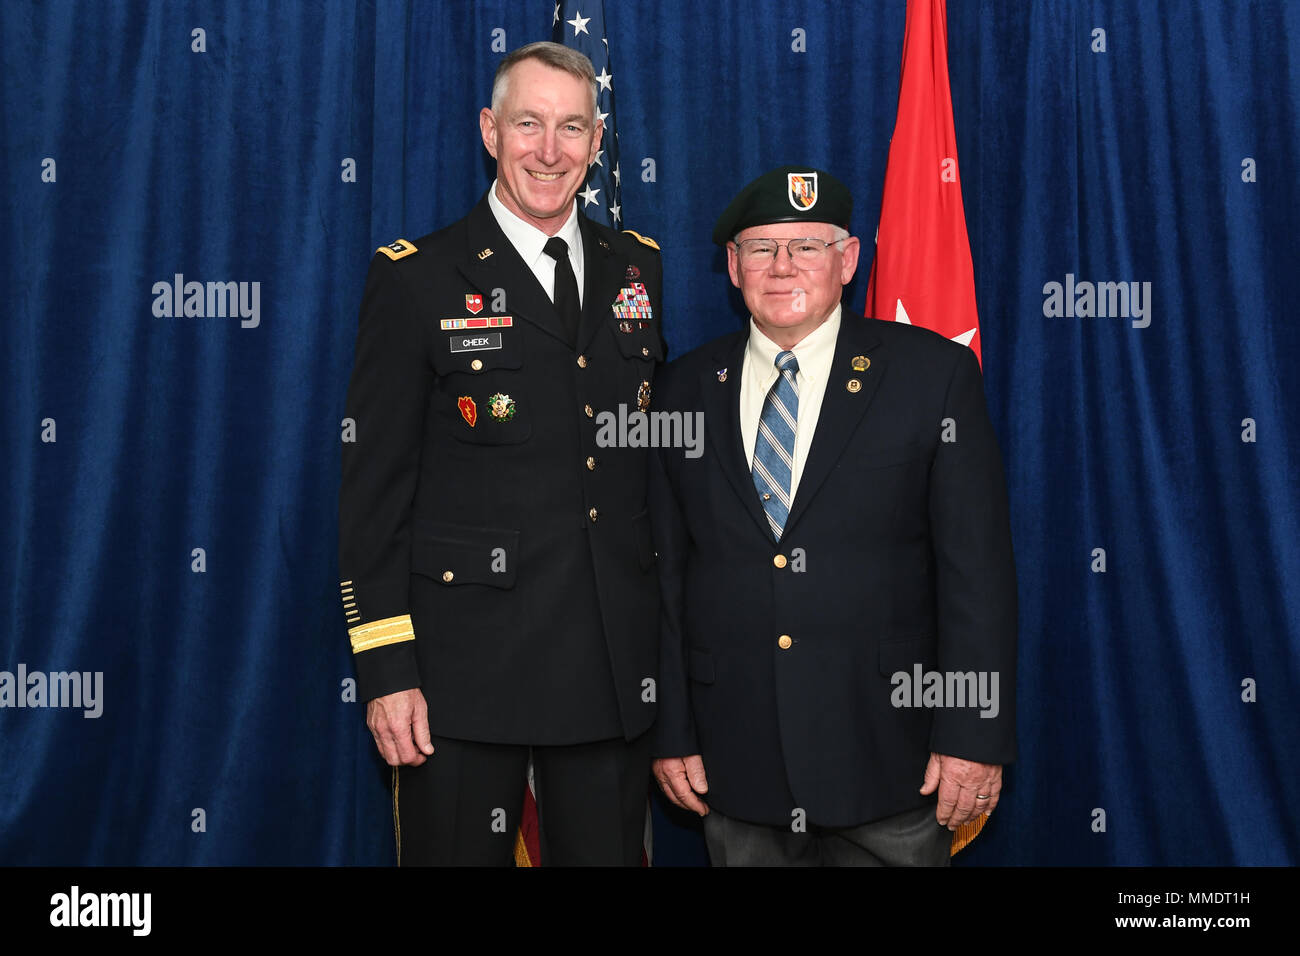 Retired U.S. Army Capt. Gary M. Rose and Director of the Army Staff Lt. Gen. Gary H. Cheek pose for a photo during the Medal of Honor reception at the Marriott Fairview Park in Falls Church, Virginia, Oct. 22, 2017. Rose will be awarded the Medal of Honor Oct. 23, 2017, for actions during Operation Tailwind in Southeastern Laos during the Vietnam War, Sept. 11-14, 1970. Then-Sgt. Rose was assigned to the 5th Special Forces Group (Airborne) at the time of the action.  (U.S. Army photo by Spc. Tammy Nooner) Stock Photo